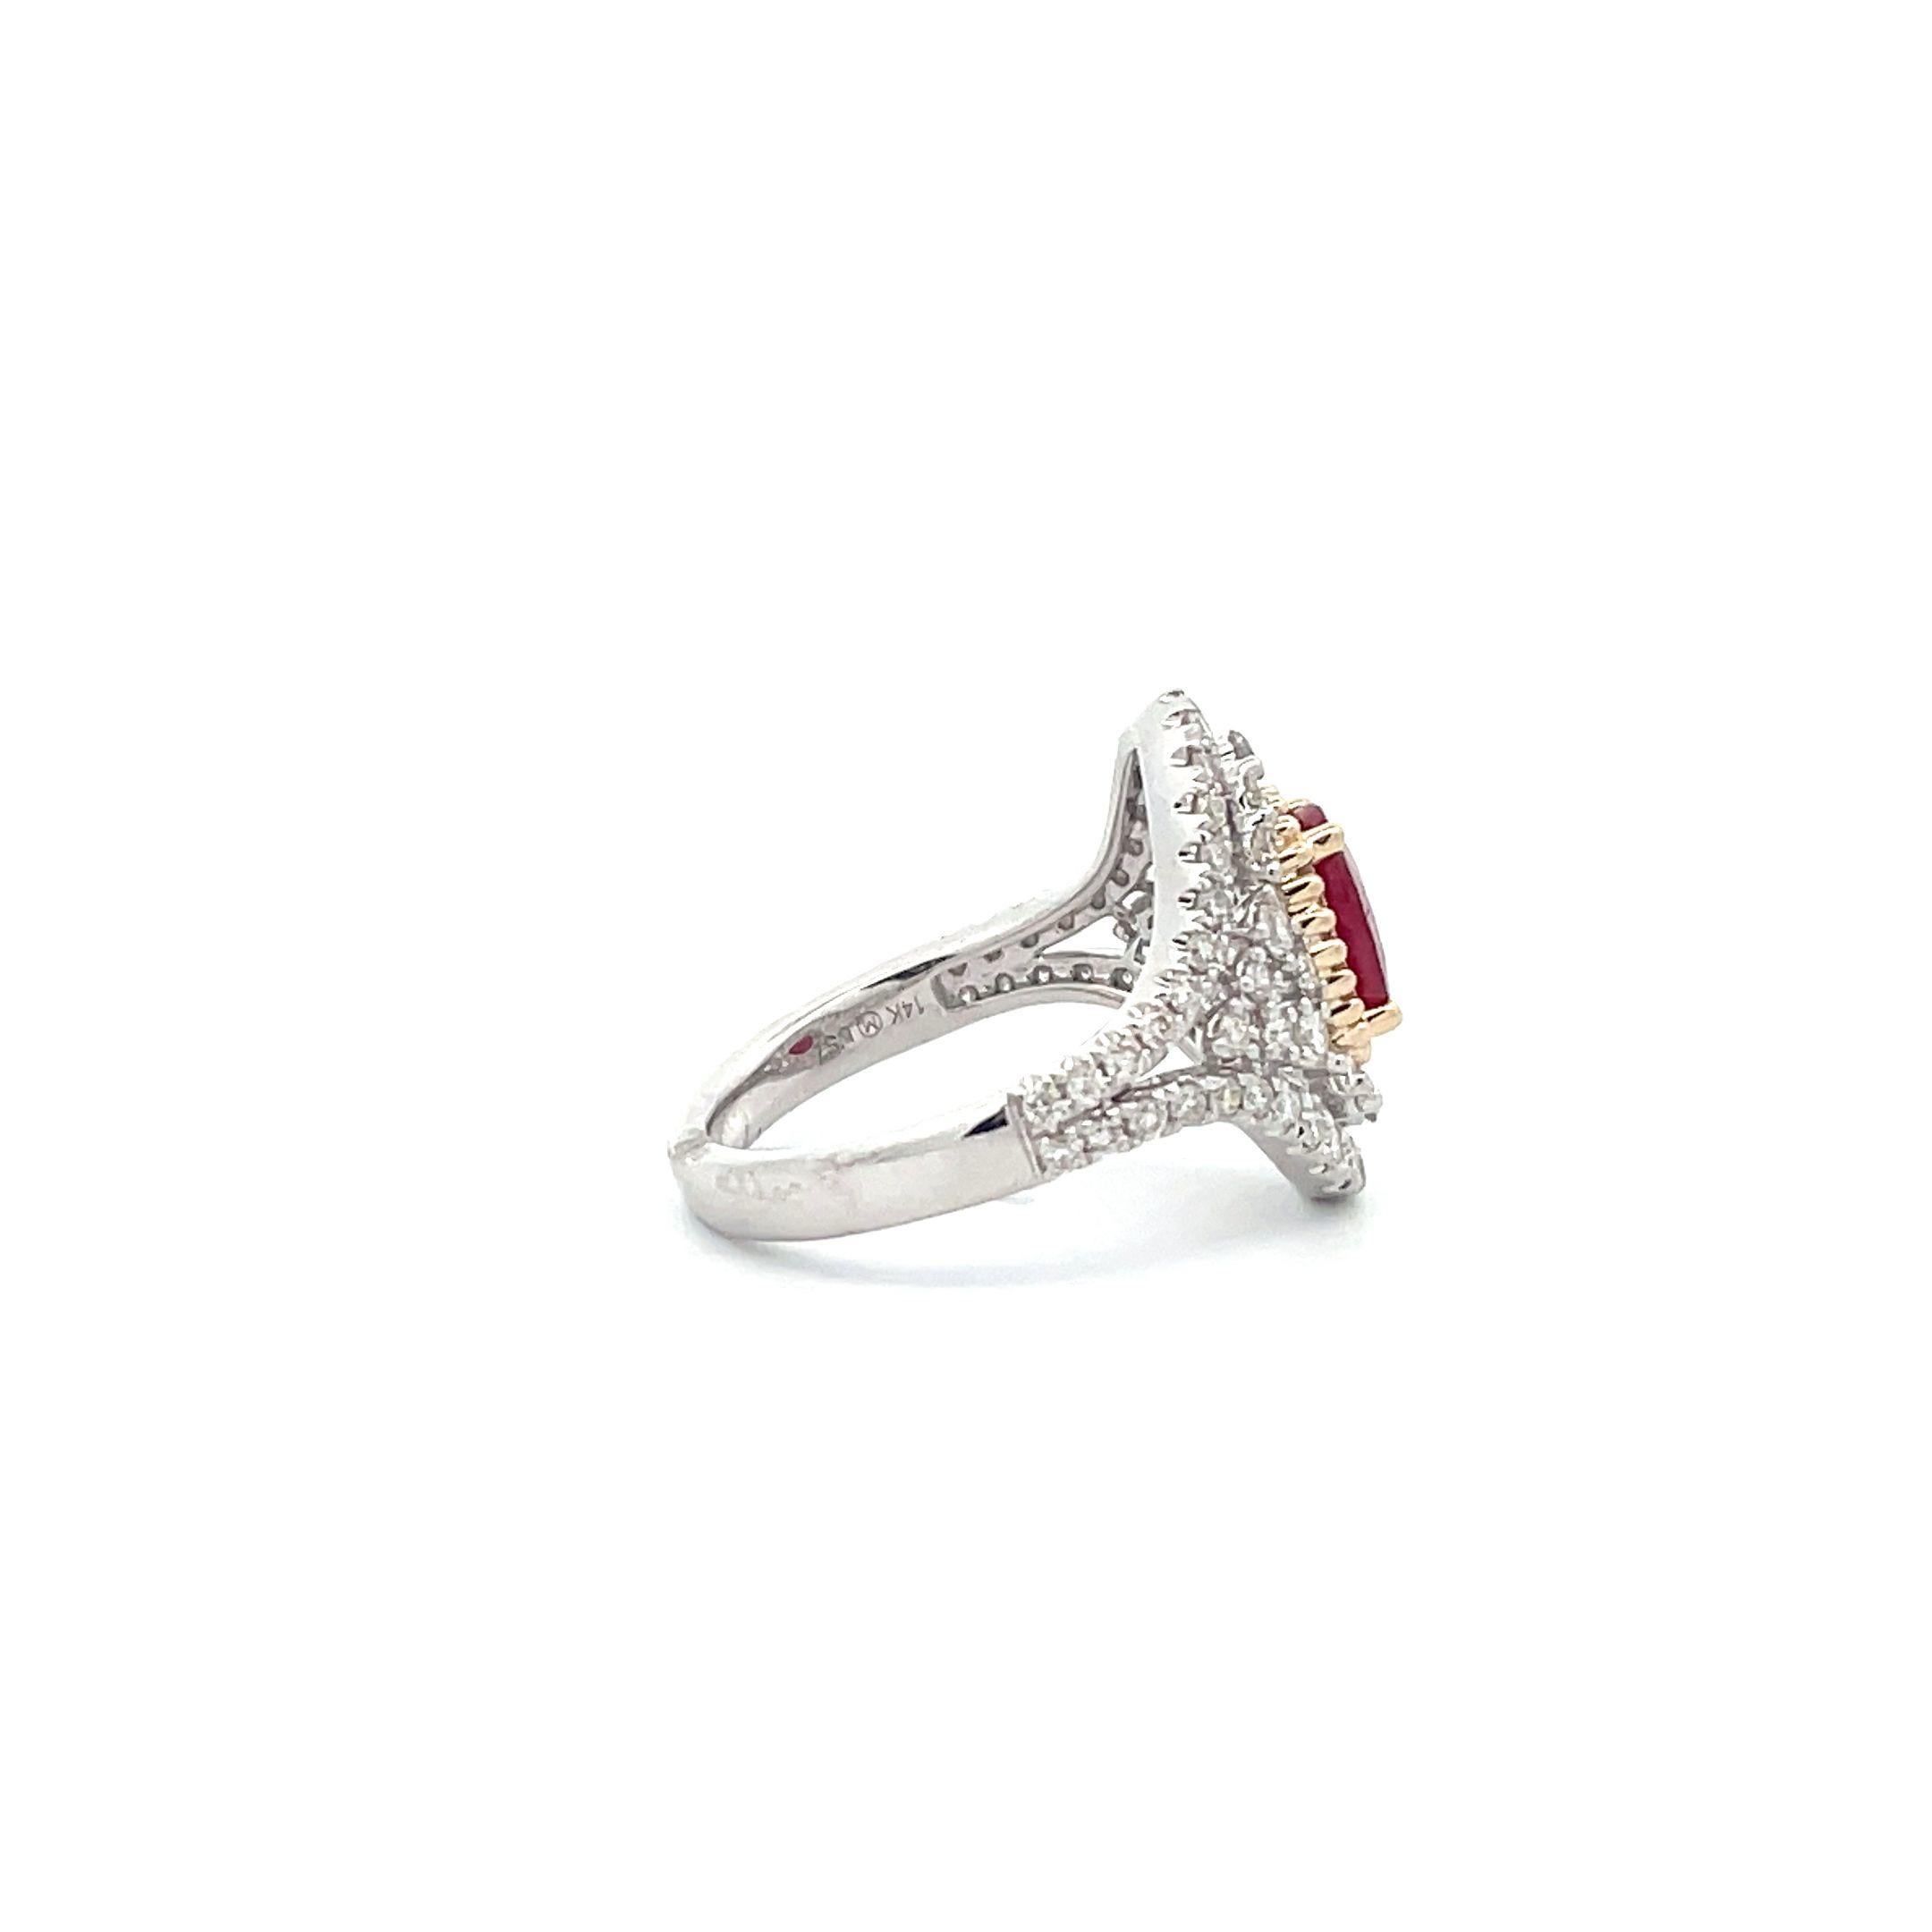 Precious, romantic and truly one of a kind: the stylish engagement ring is handcrafted by a professional artisan in 14K White Gold and Yellow Gold Prongs. The center stone is a 1.40 ct. Ruby from our polished collection to enhance your beauty with